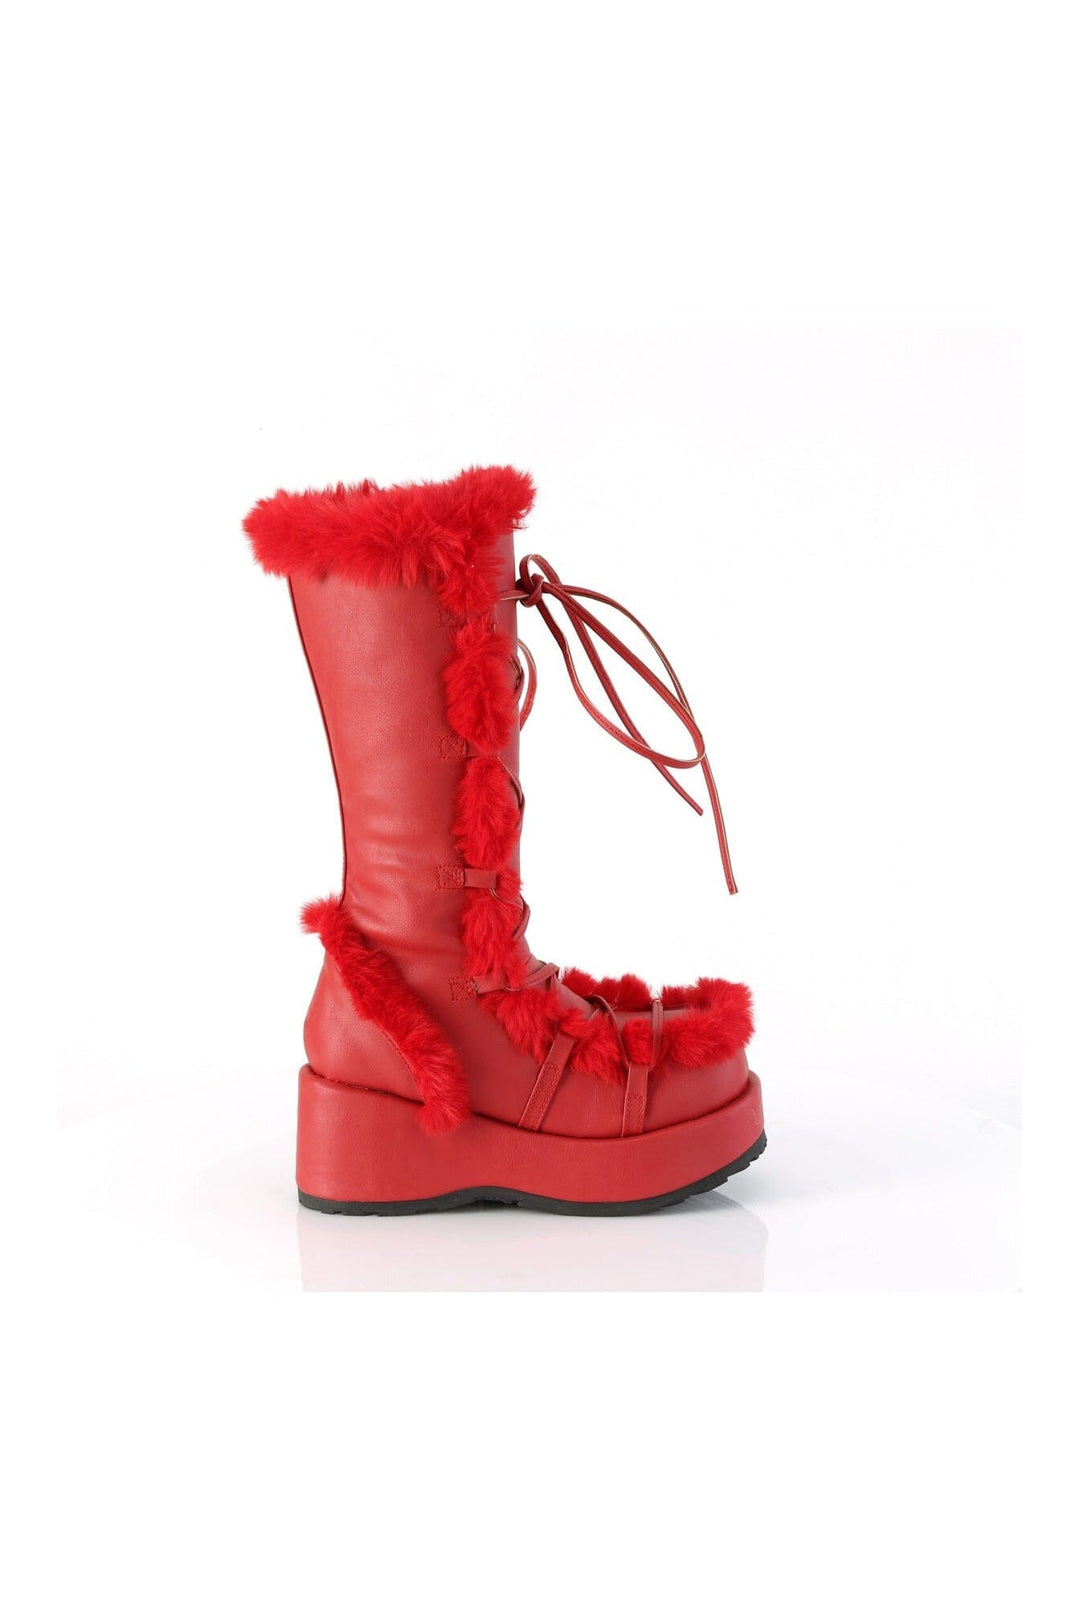 CUBBY-311 Red Vegan Leather Knee Boot-Knee Boots-Demonia-SEXYSHOES.COM